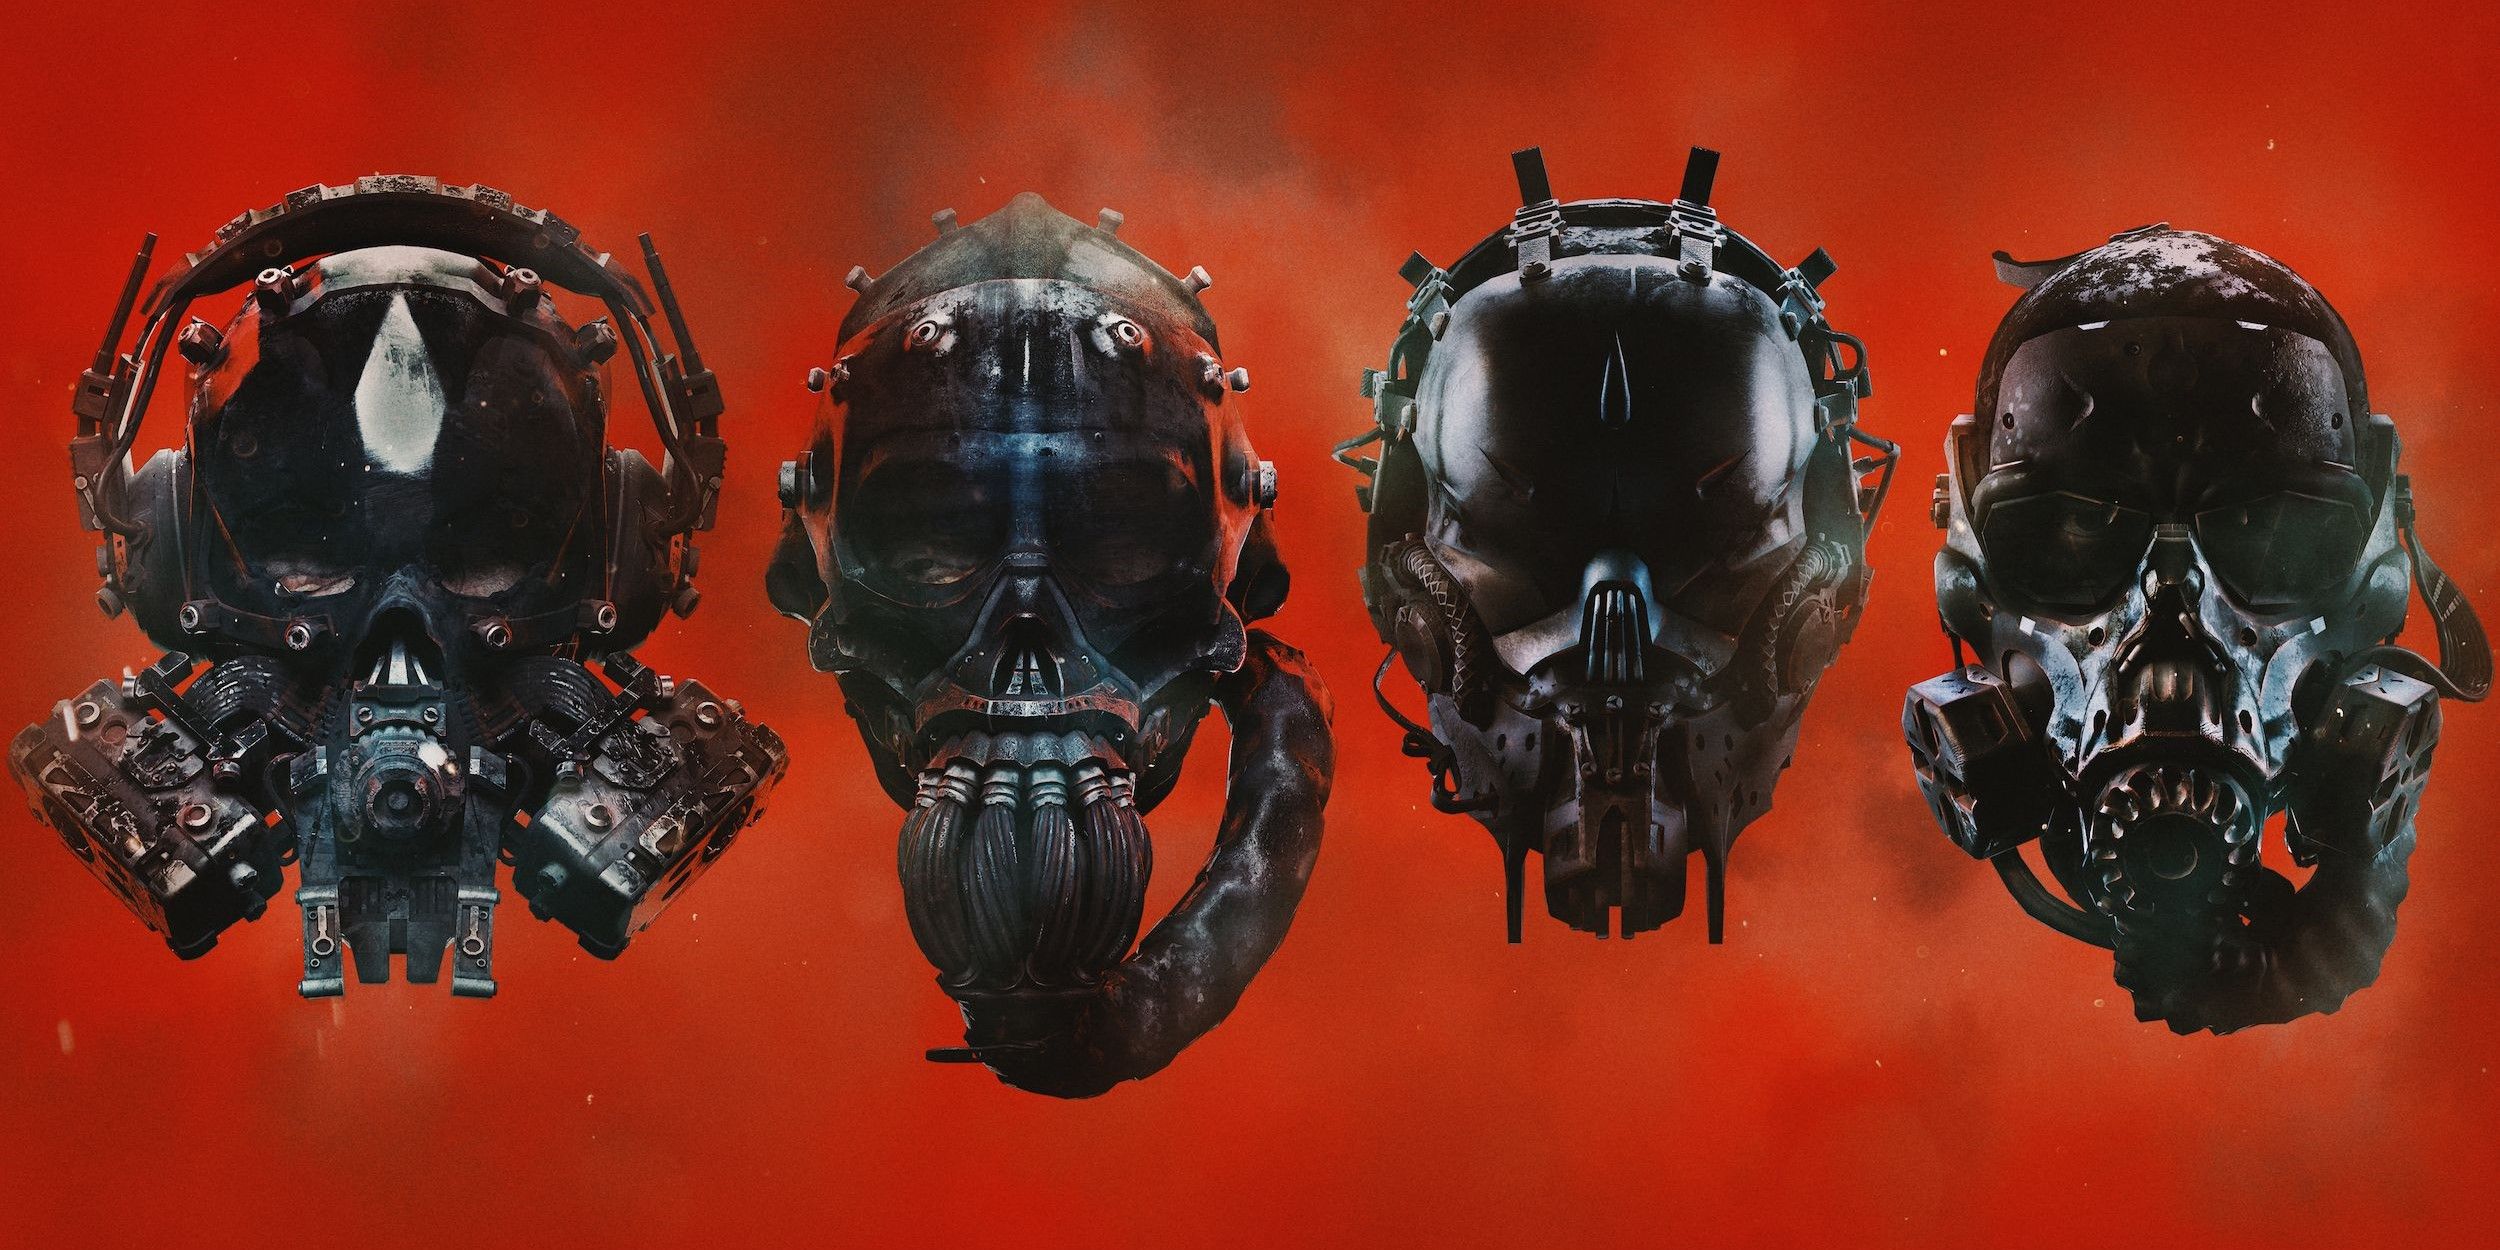 Official art for GTFO featuring the four playable characters